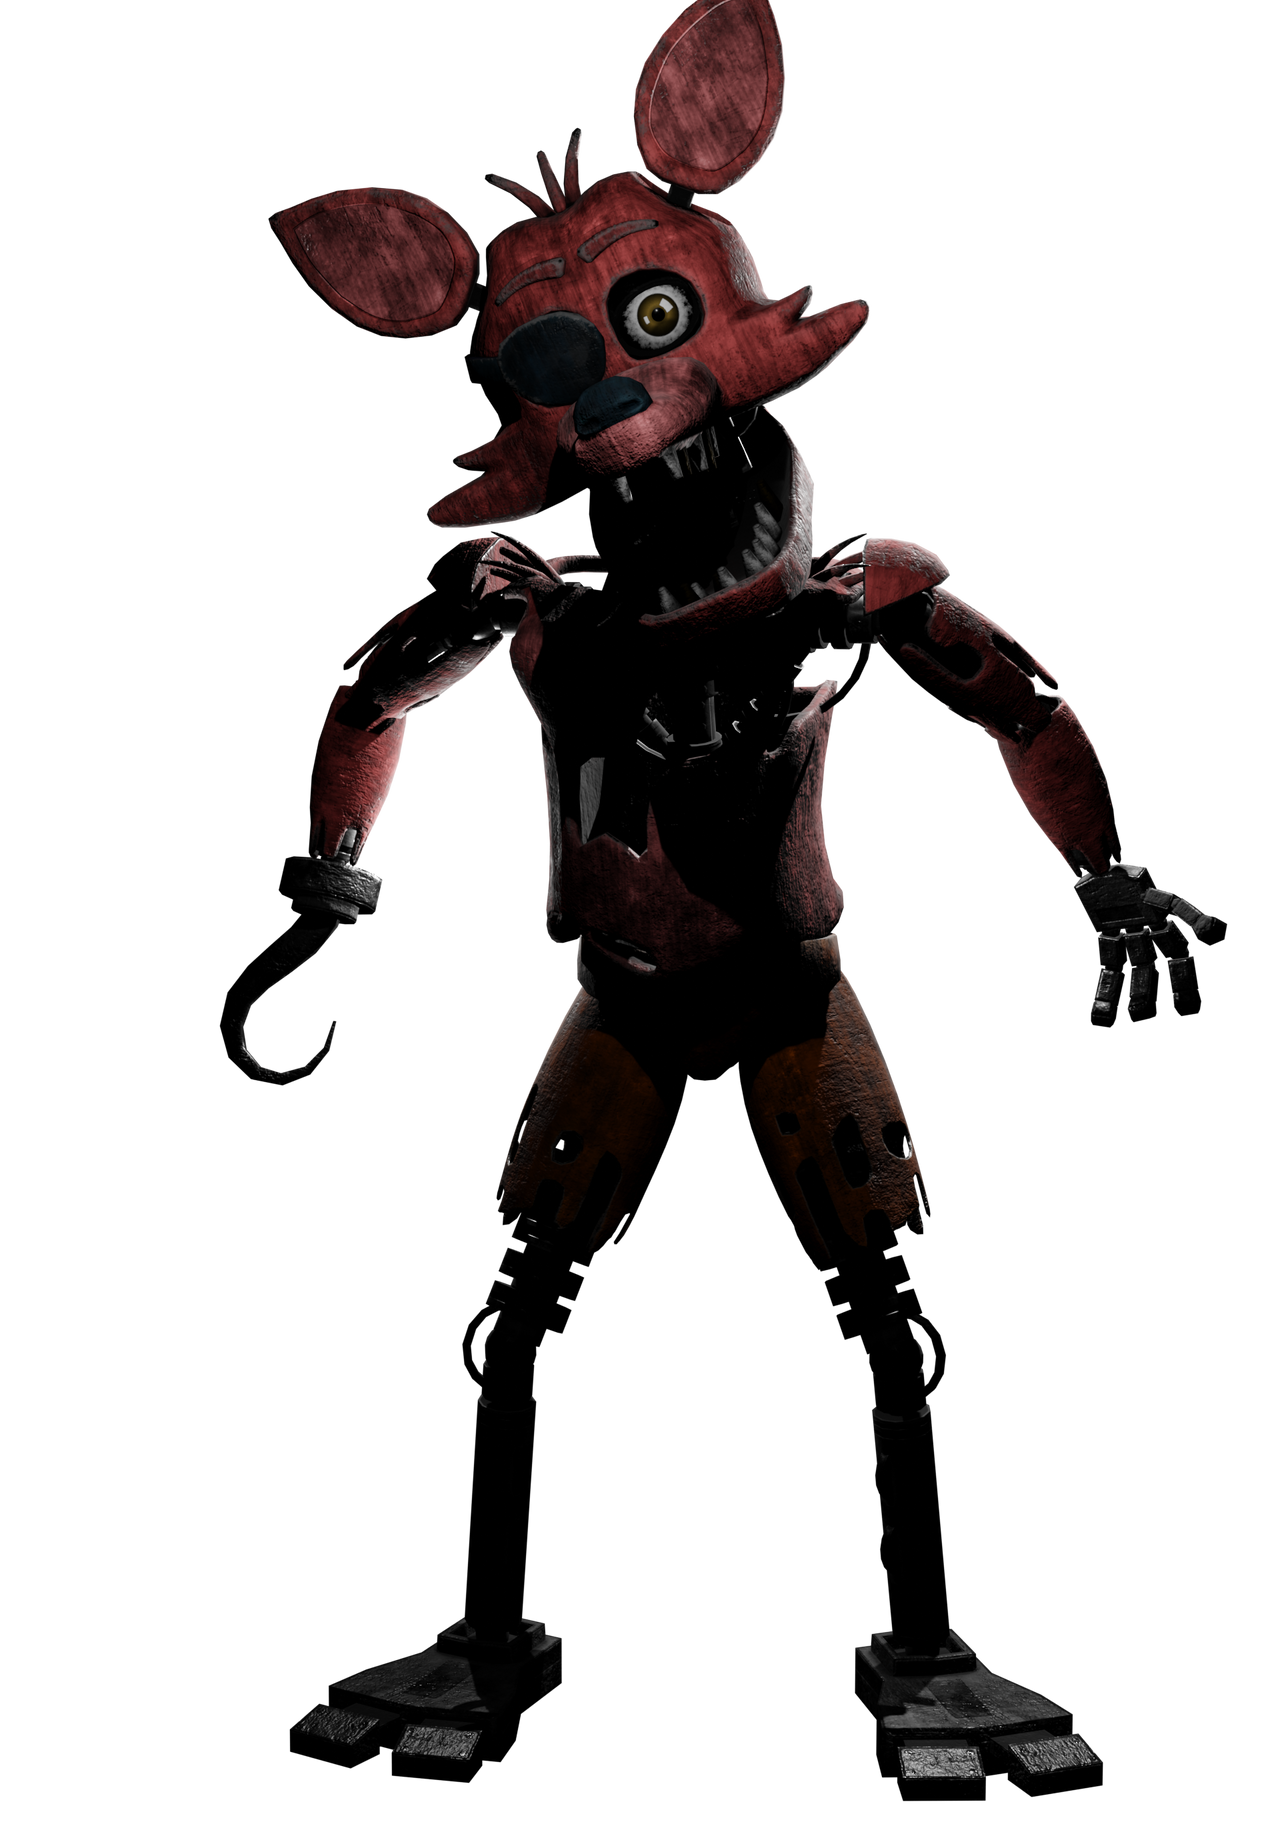 FNAF 2) Withered Foxy Poster by TheUnbearable101 on DeviantArt